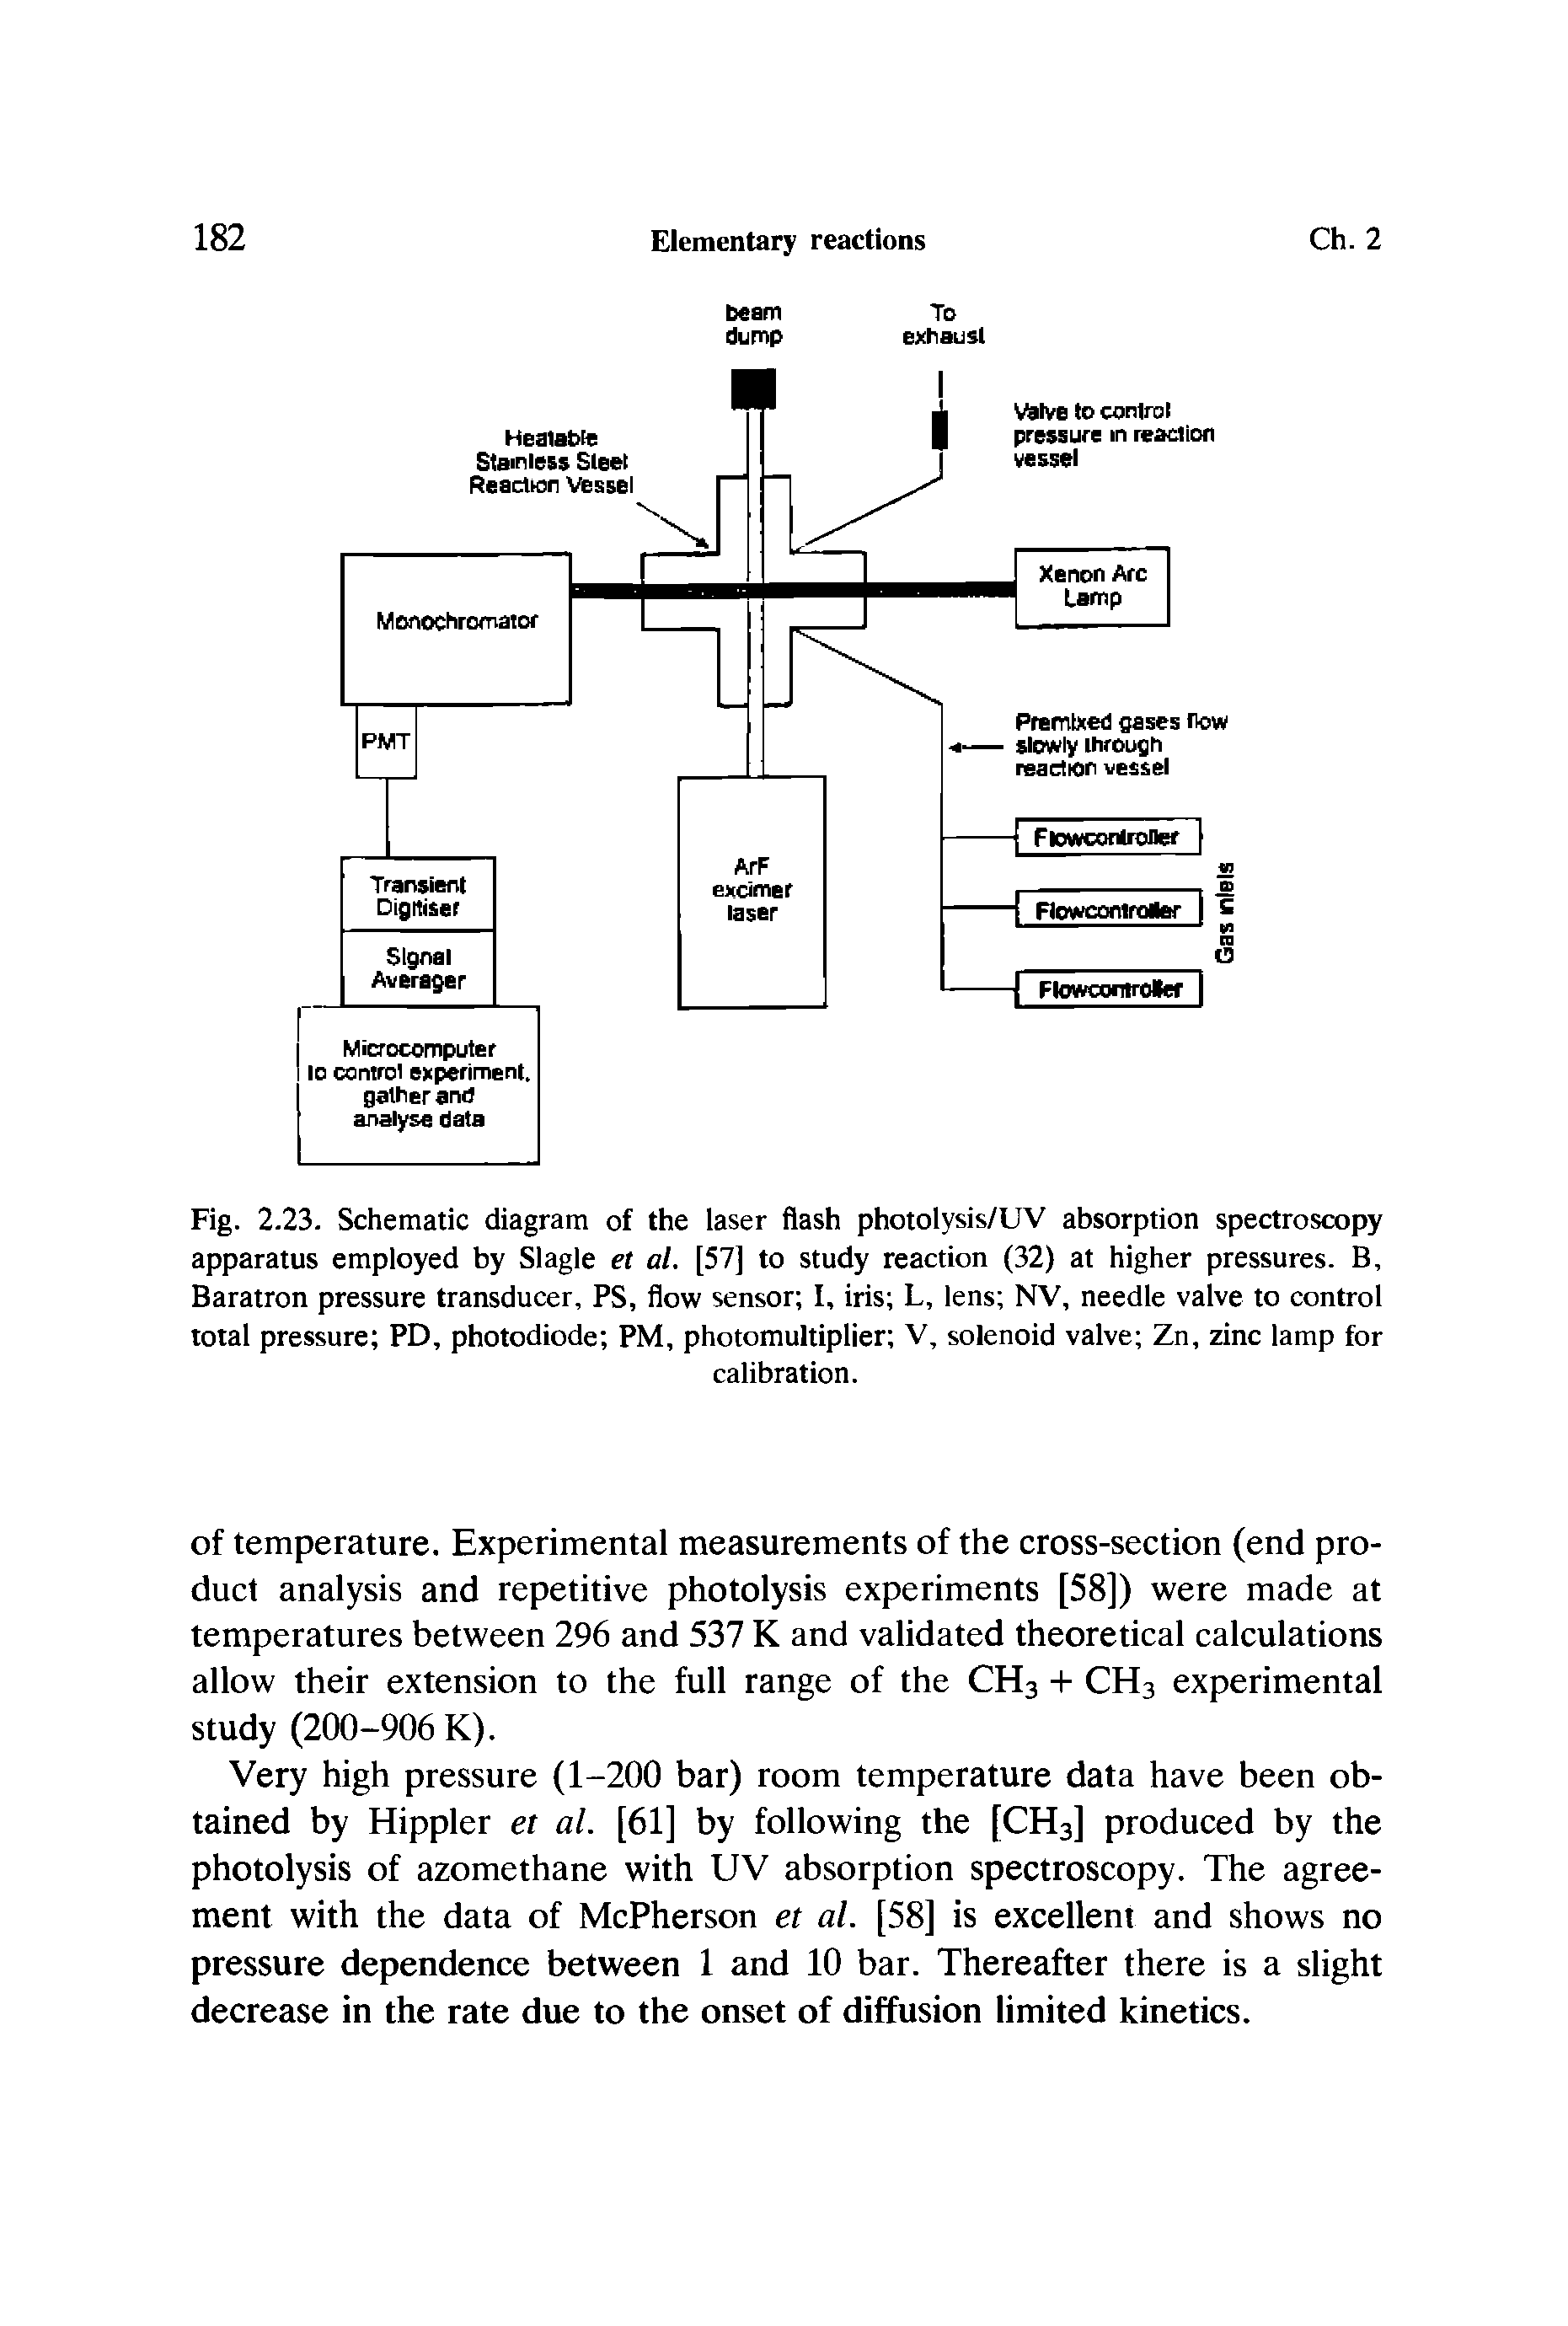 Fig. 2.23. Schematic diagram of the laser flash photolysis/UV absorption spectroscopy apparatus employed by Slagle et al. [57] to study reaction (32) at higher pressures. B, Baratron pressure transducer, PS, flow sensor I, iris L, lens NV, needle valve to control total pressure PD, photodiode PM, photomultiplier V, solenoid valve Zn, zinc lamp for...